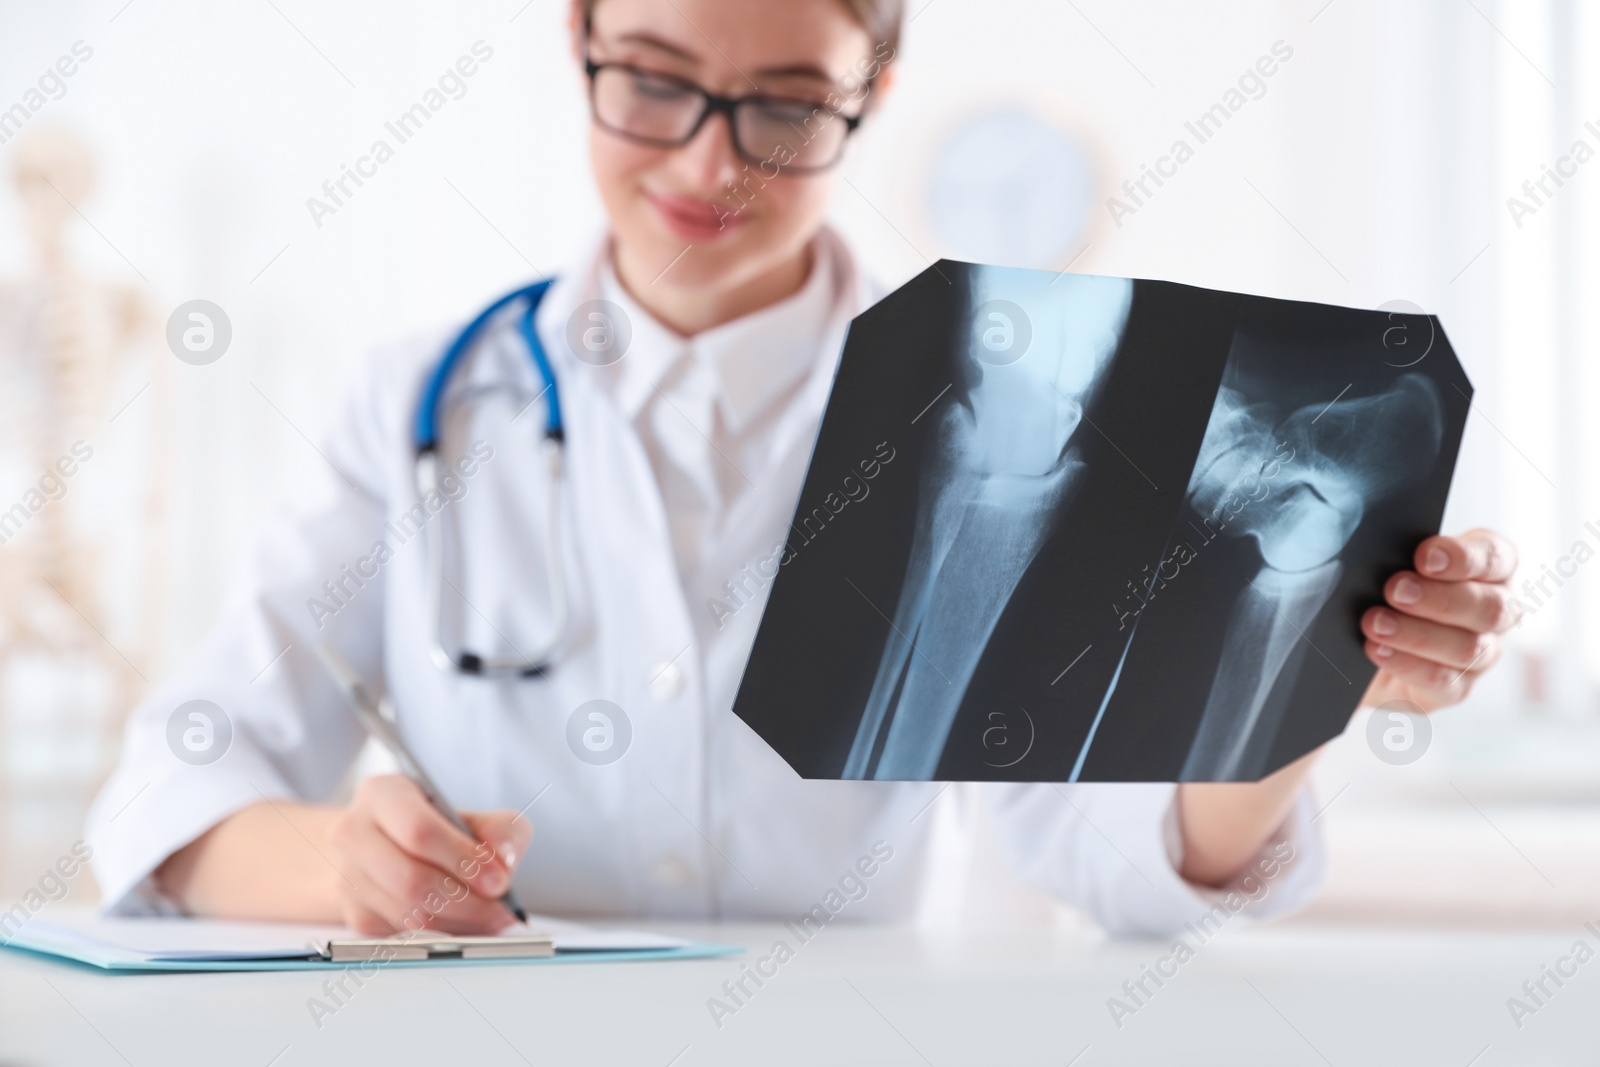 Photo of Orthopedist examining radiography at desk in office, focus on X-ray picture